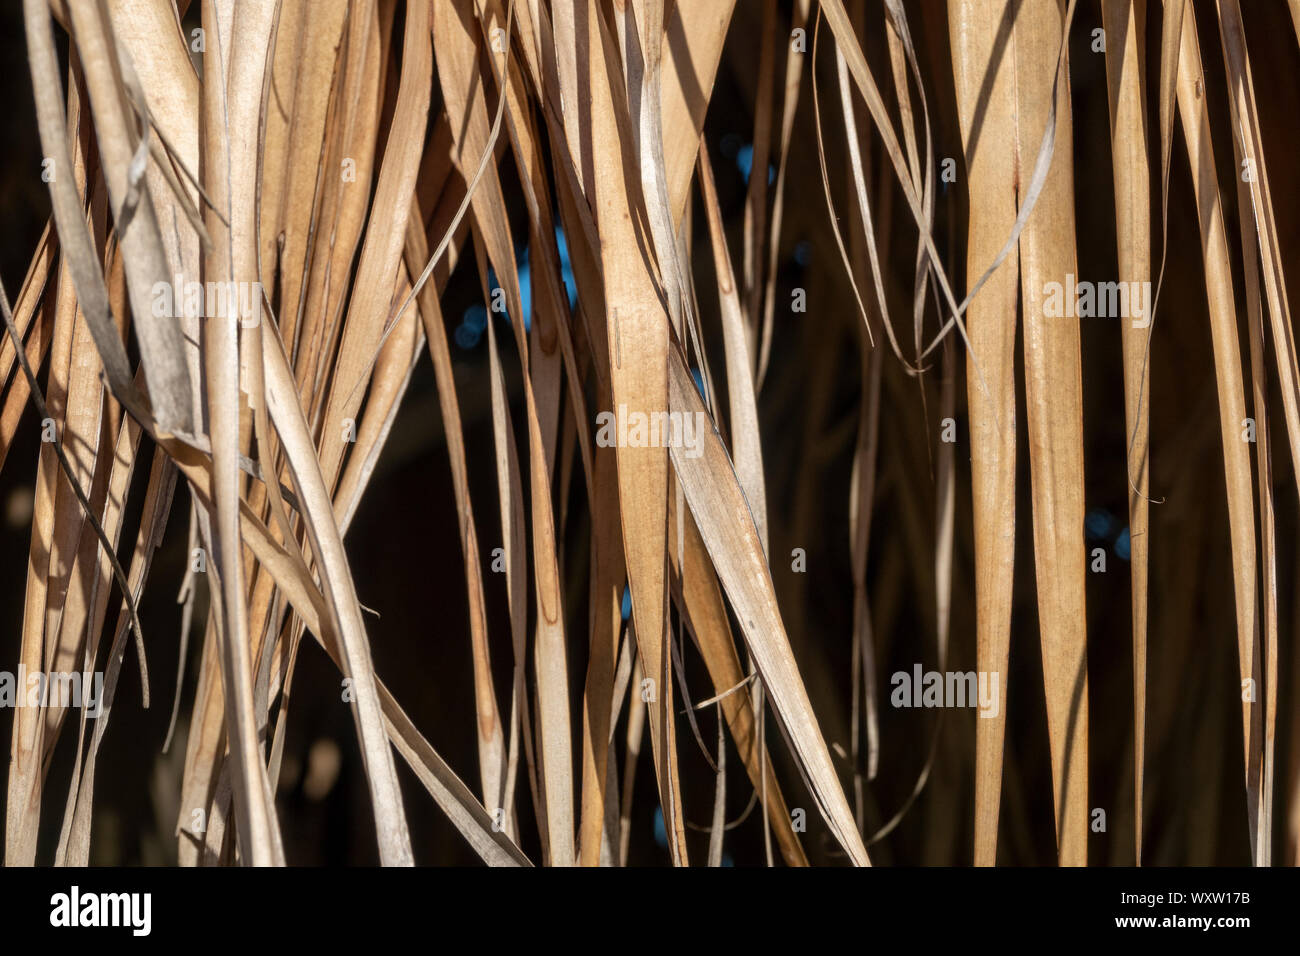 Close up section of dead palm fronds, Bermuda Stock Photo